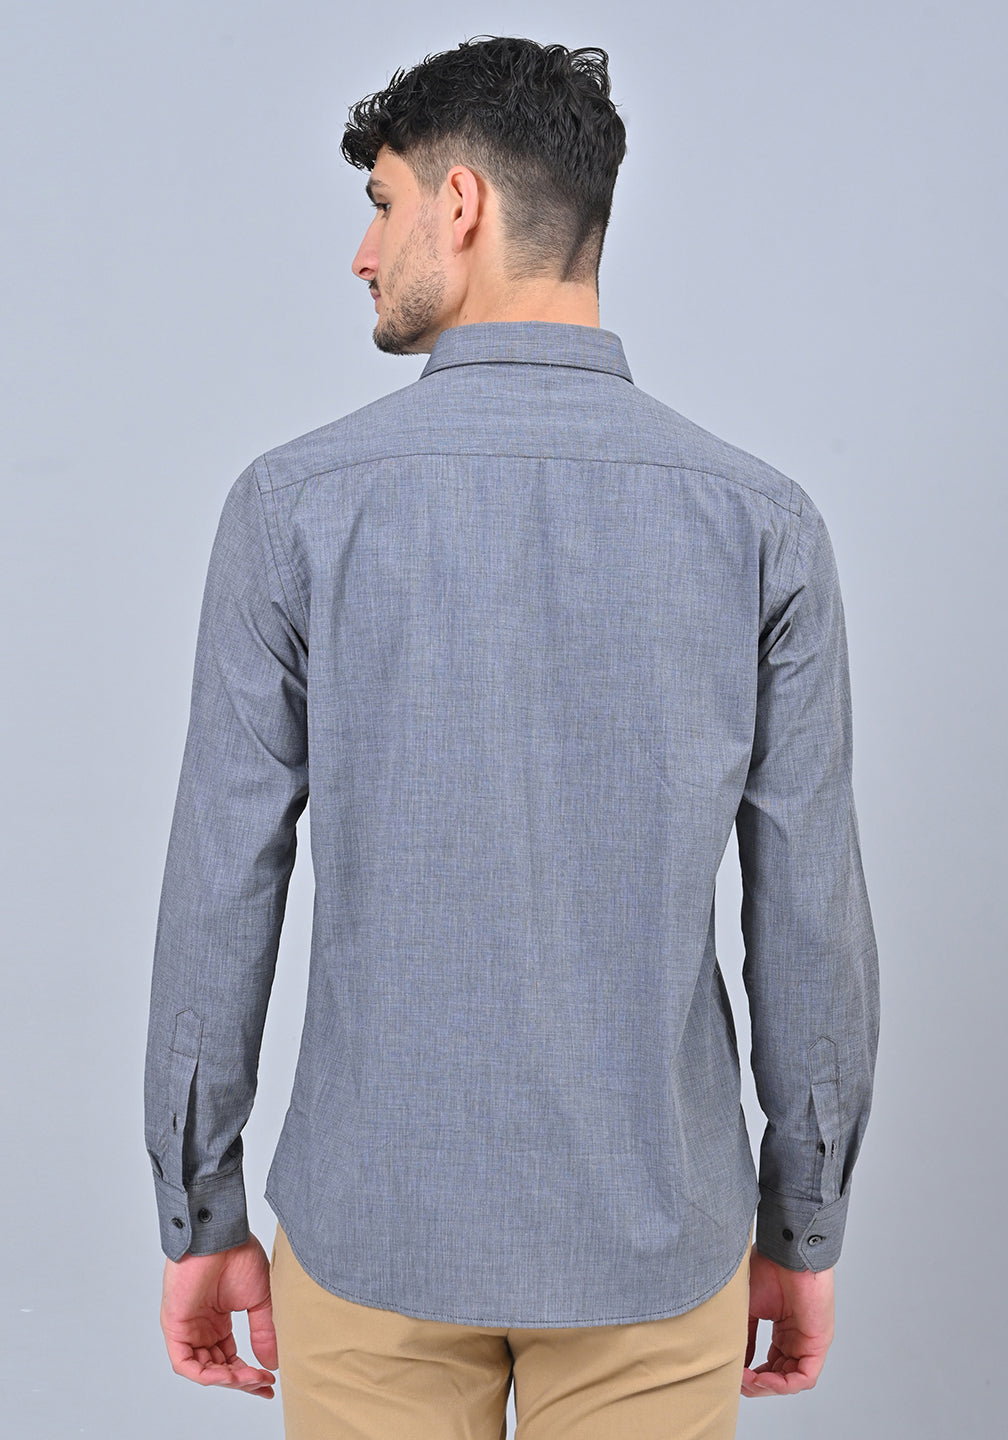 Grey Colour Solid Formal shirt